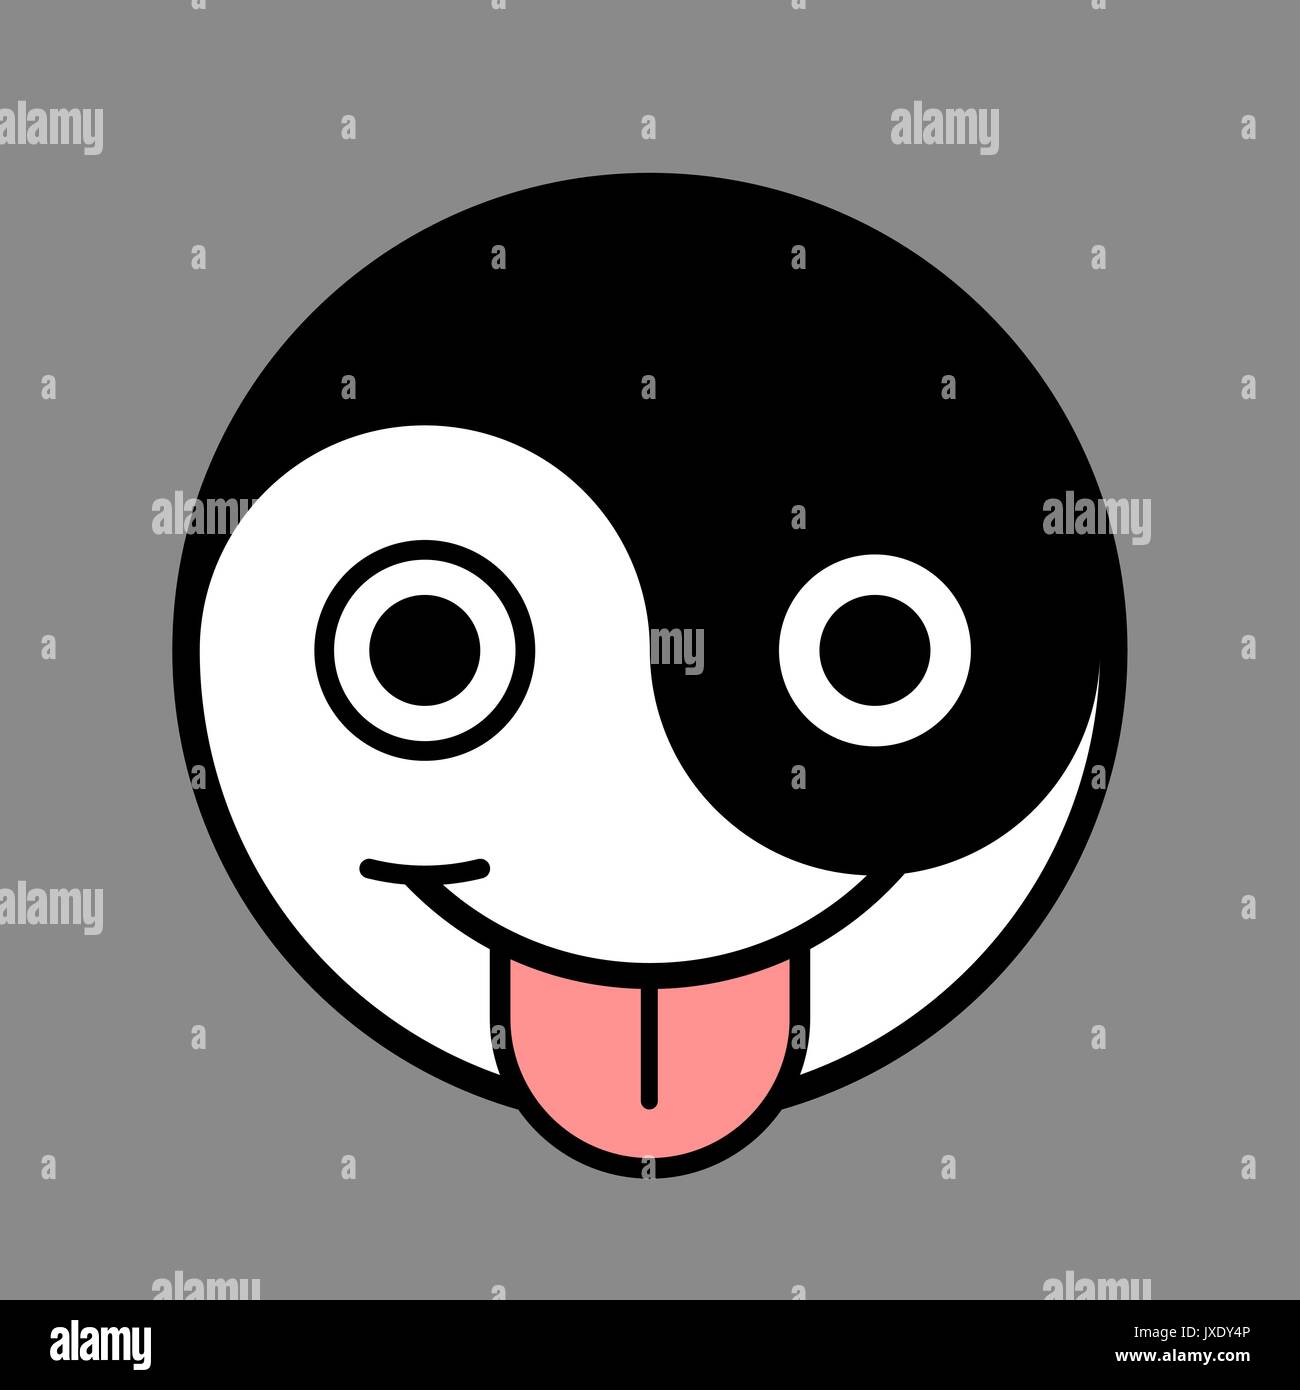 Smiley face of yin and yang symbol smiling and showing tongue, over grey background, vector cartoon illustration Stock Vector